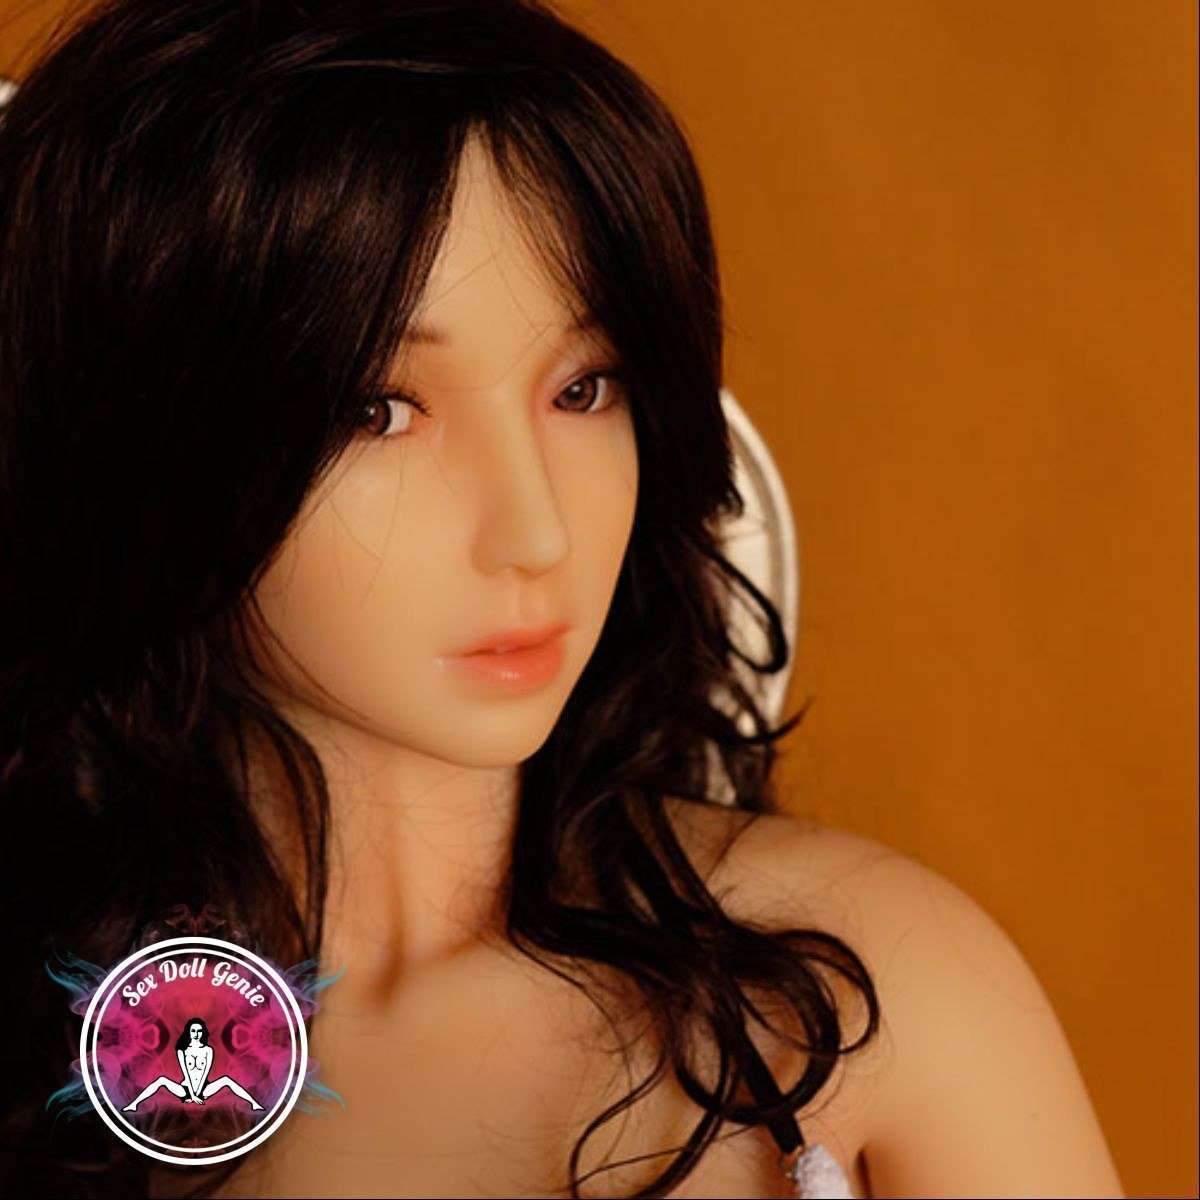 DS Doll - 158cm - Alisa Head - Type 1 D Cup Silicone Doll-27